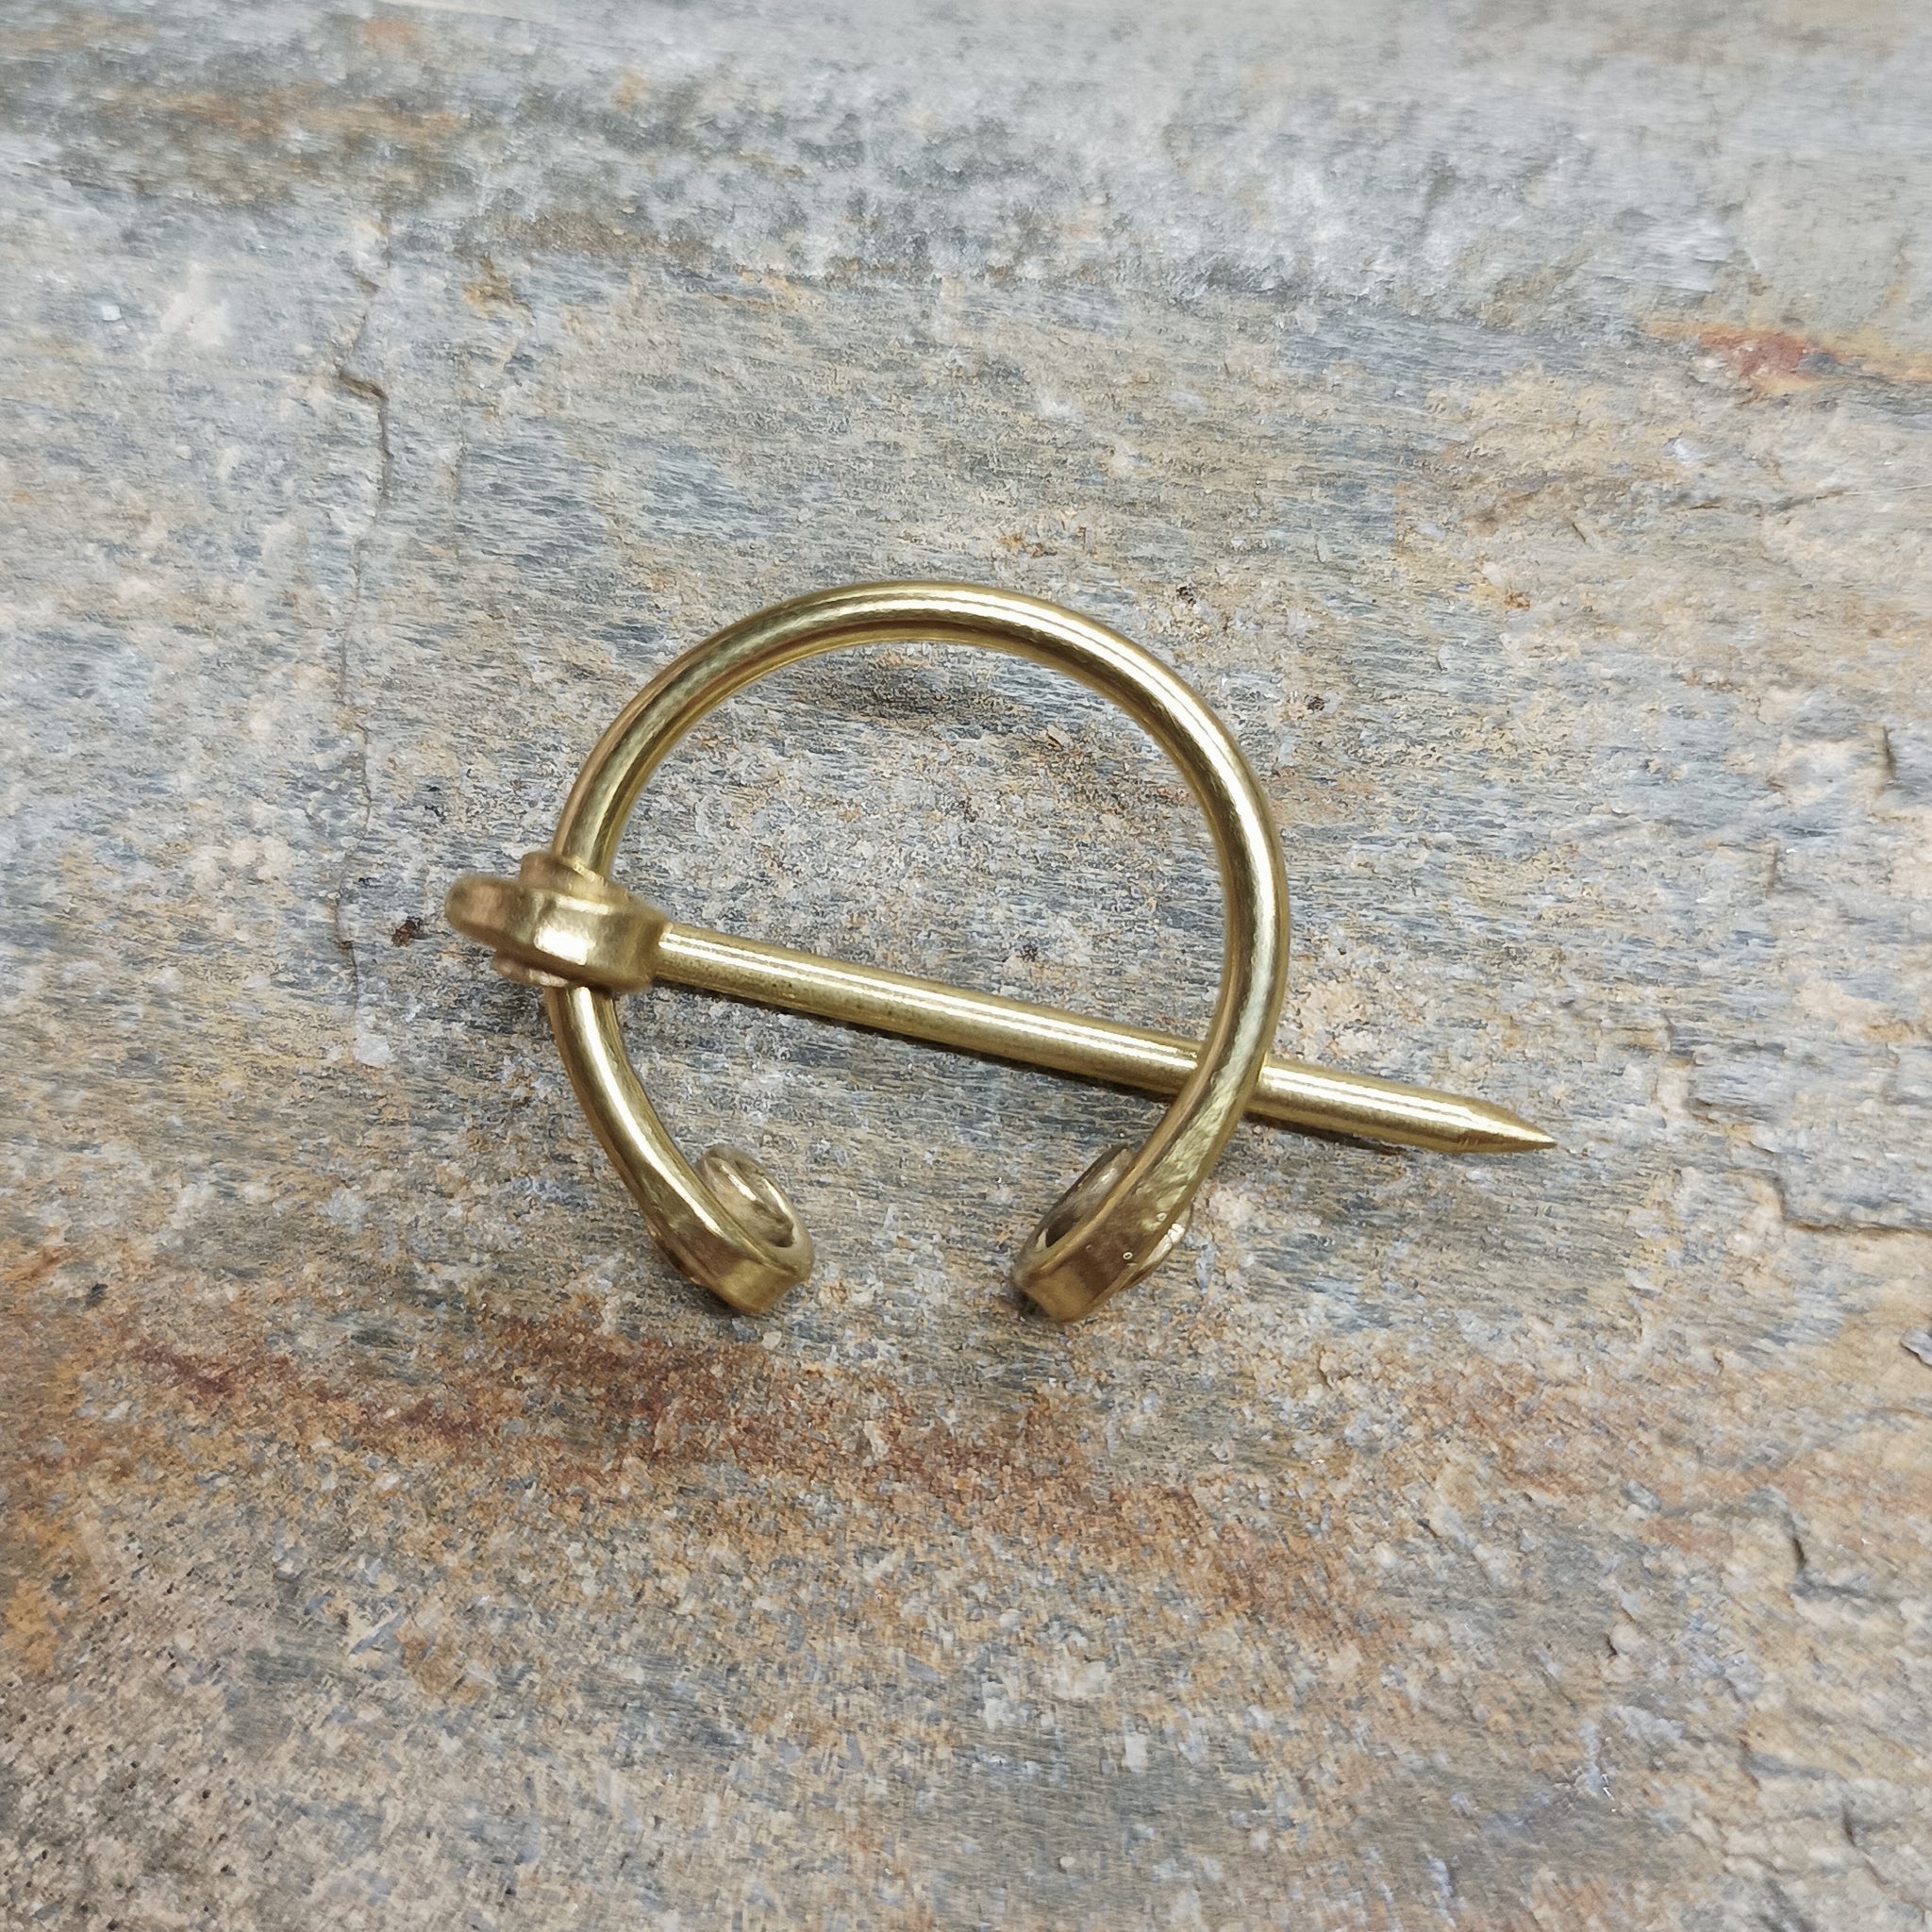 20mm Brass Cloak Pin / Clothes Pin on Rock - Back View